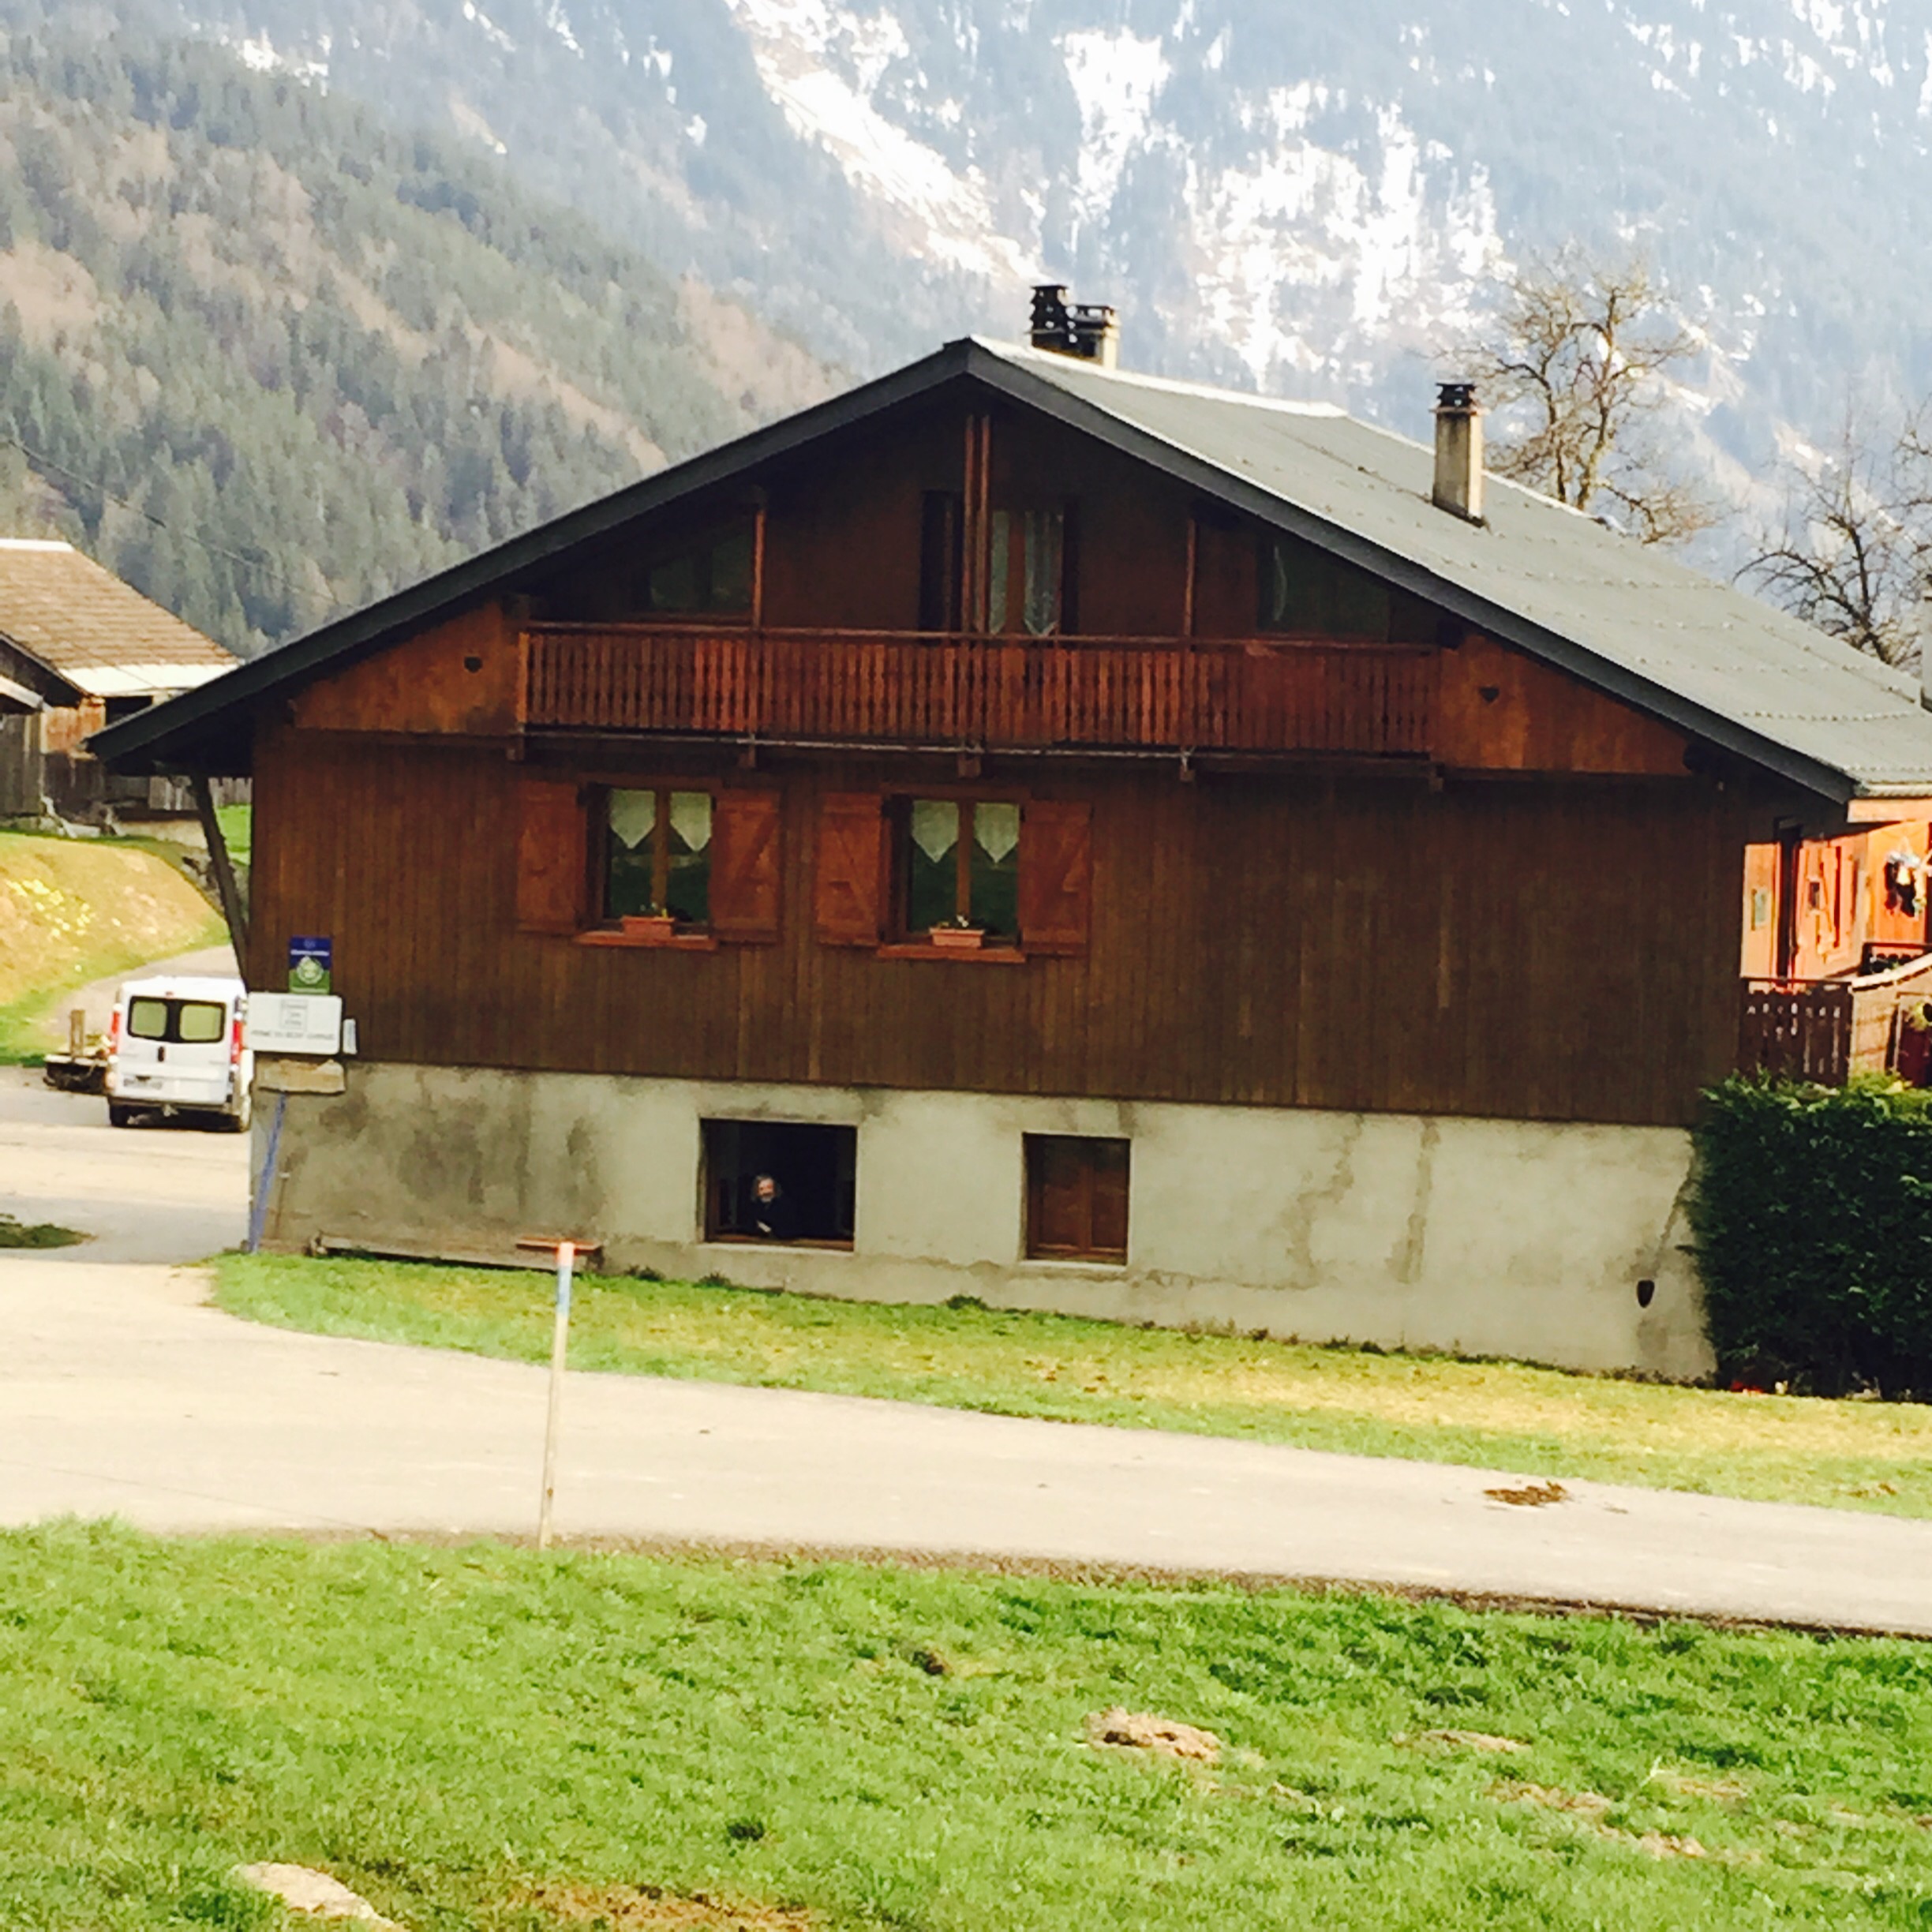  Haute-Savoie farmhouse with views of the alps in the background. 